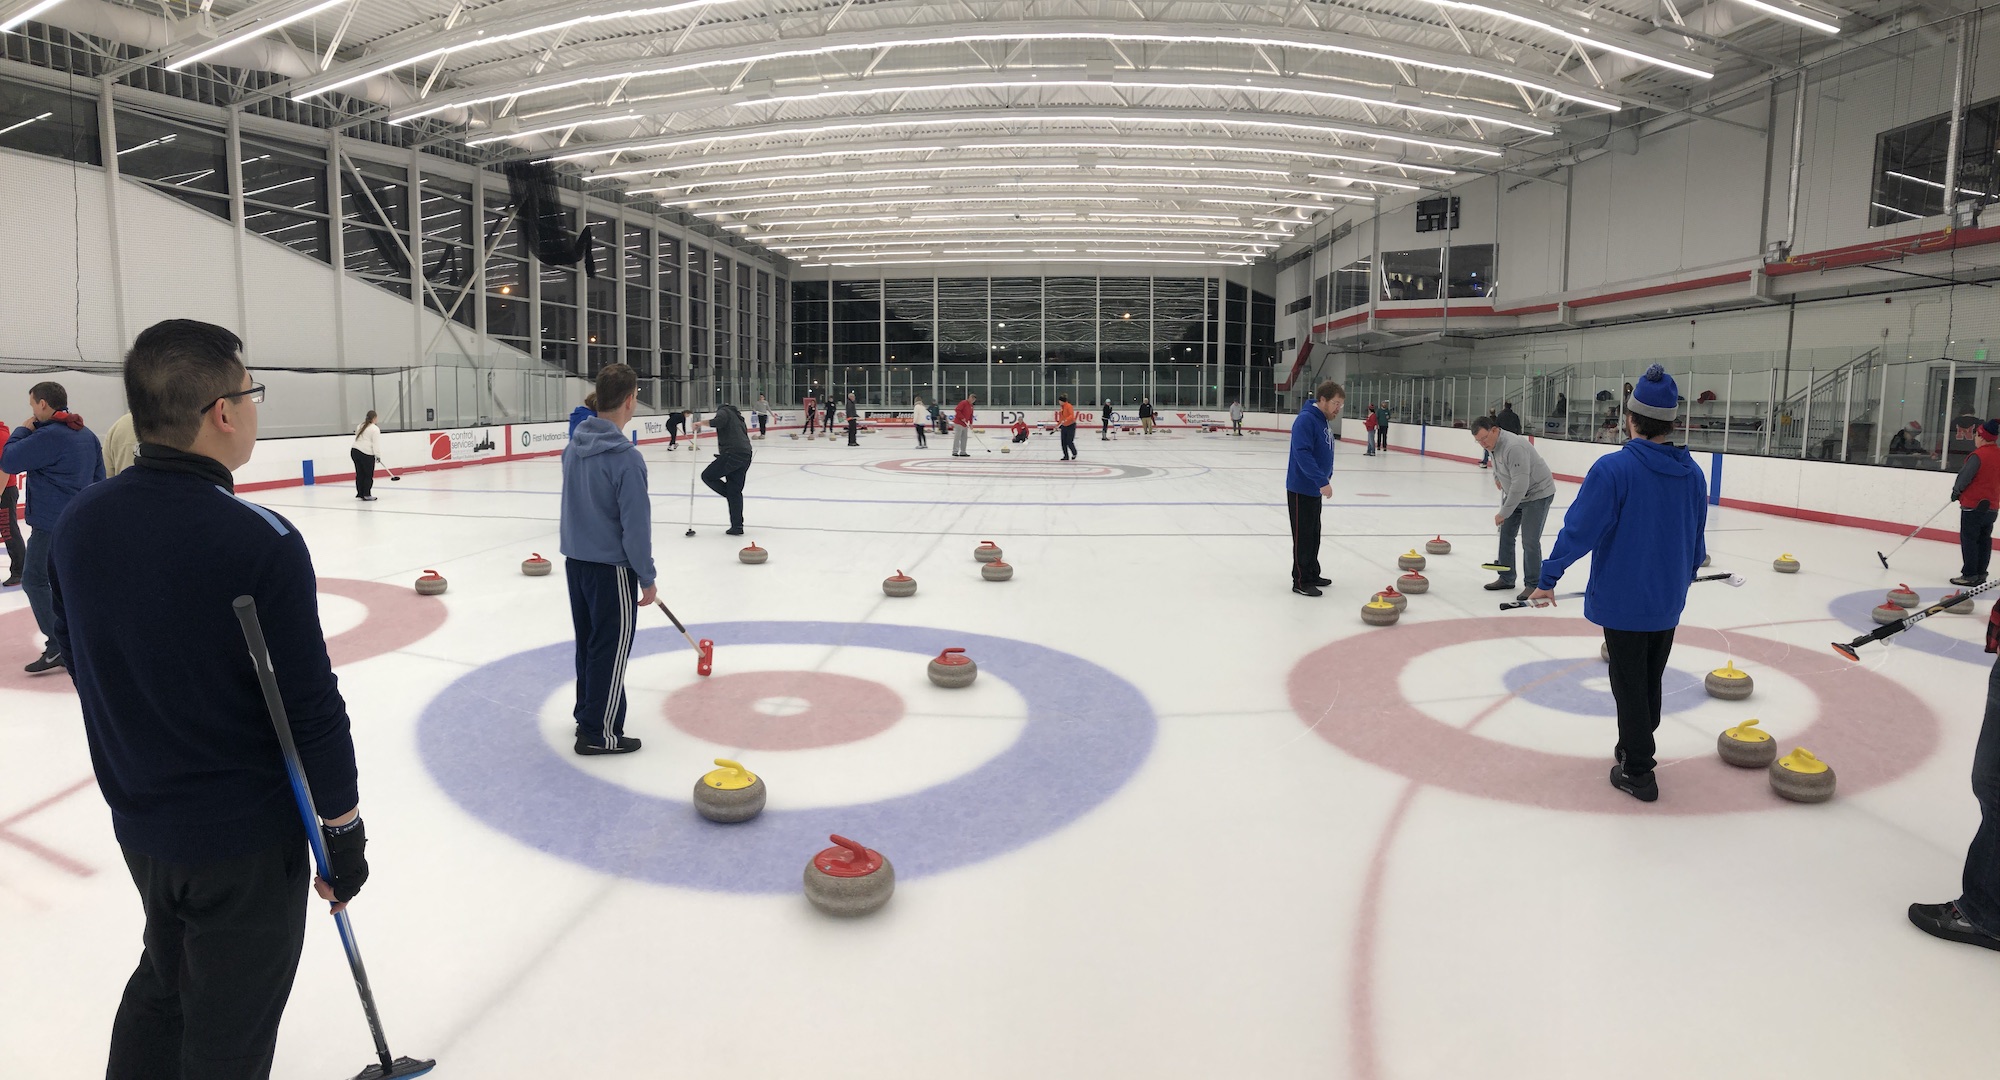 Practice Ice / Drop-in Curling - Sunday, Mar 20, 2022 at 4:30pm